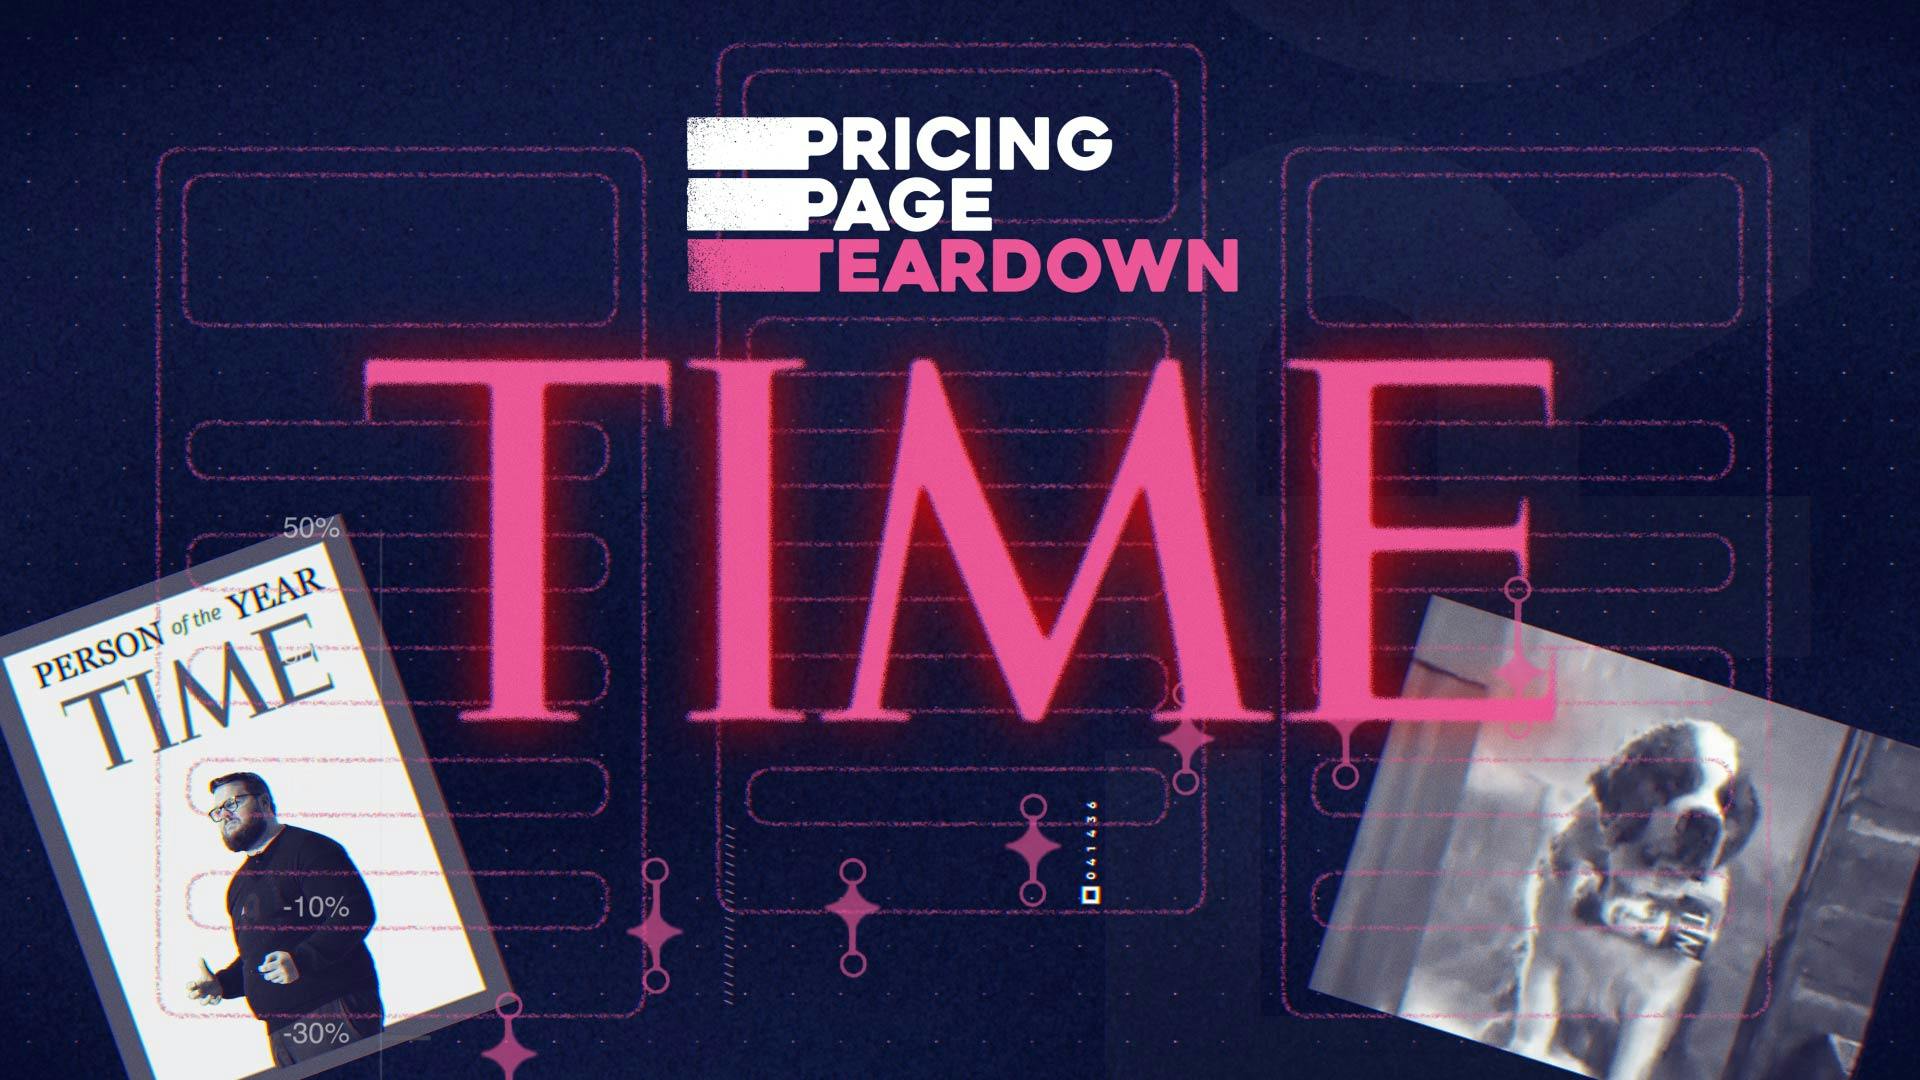 Pricing Page Teardown Thumbnail featuring Patrick Campbell, Time Magazine, and a St. Bernard